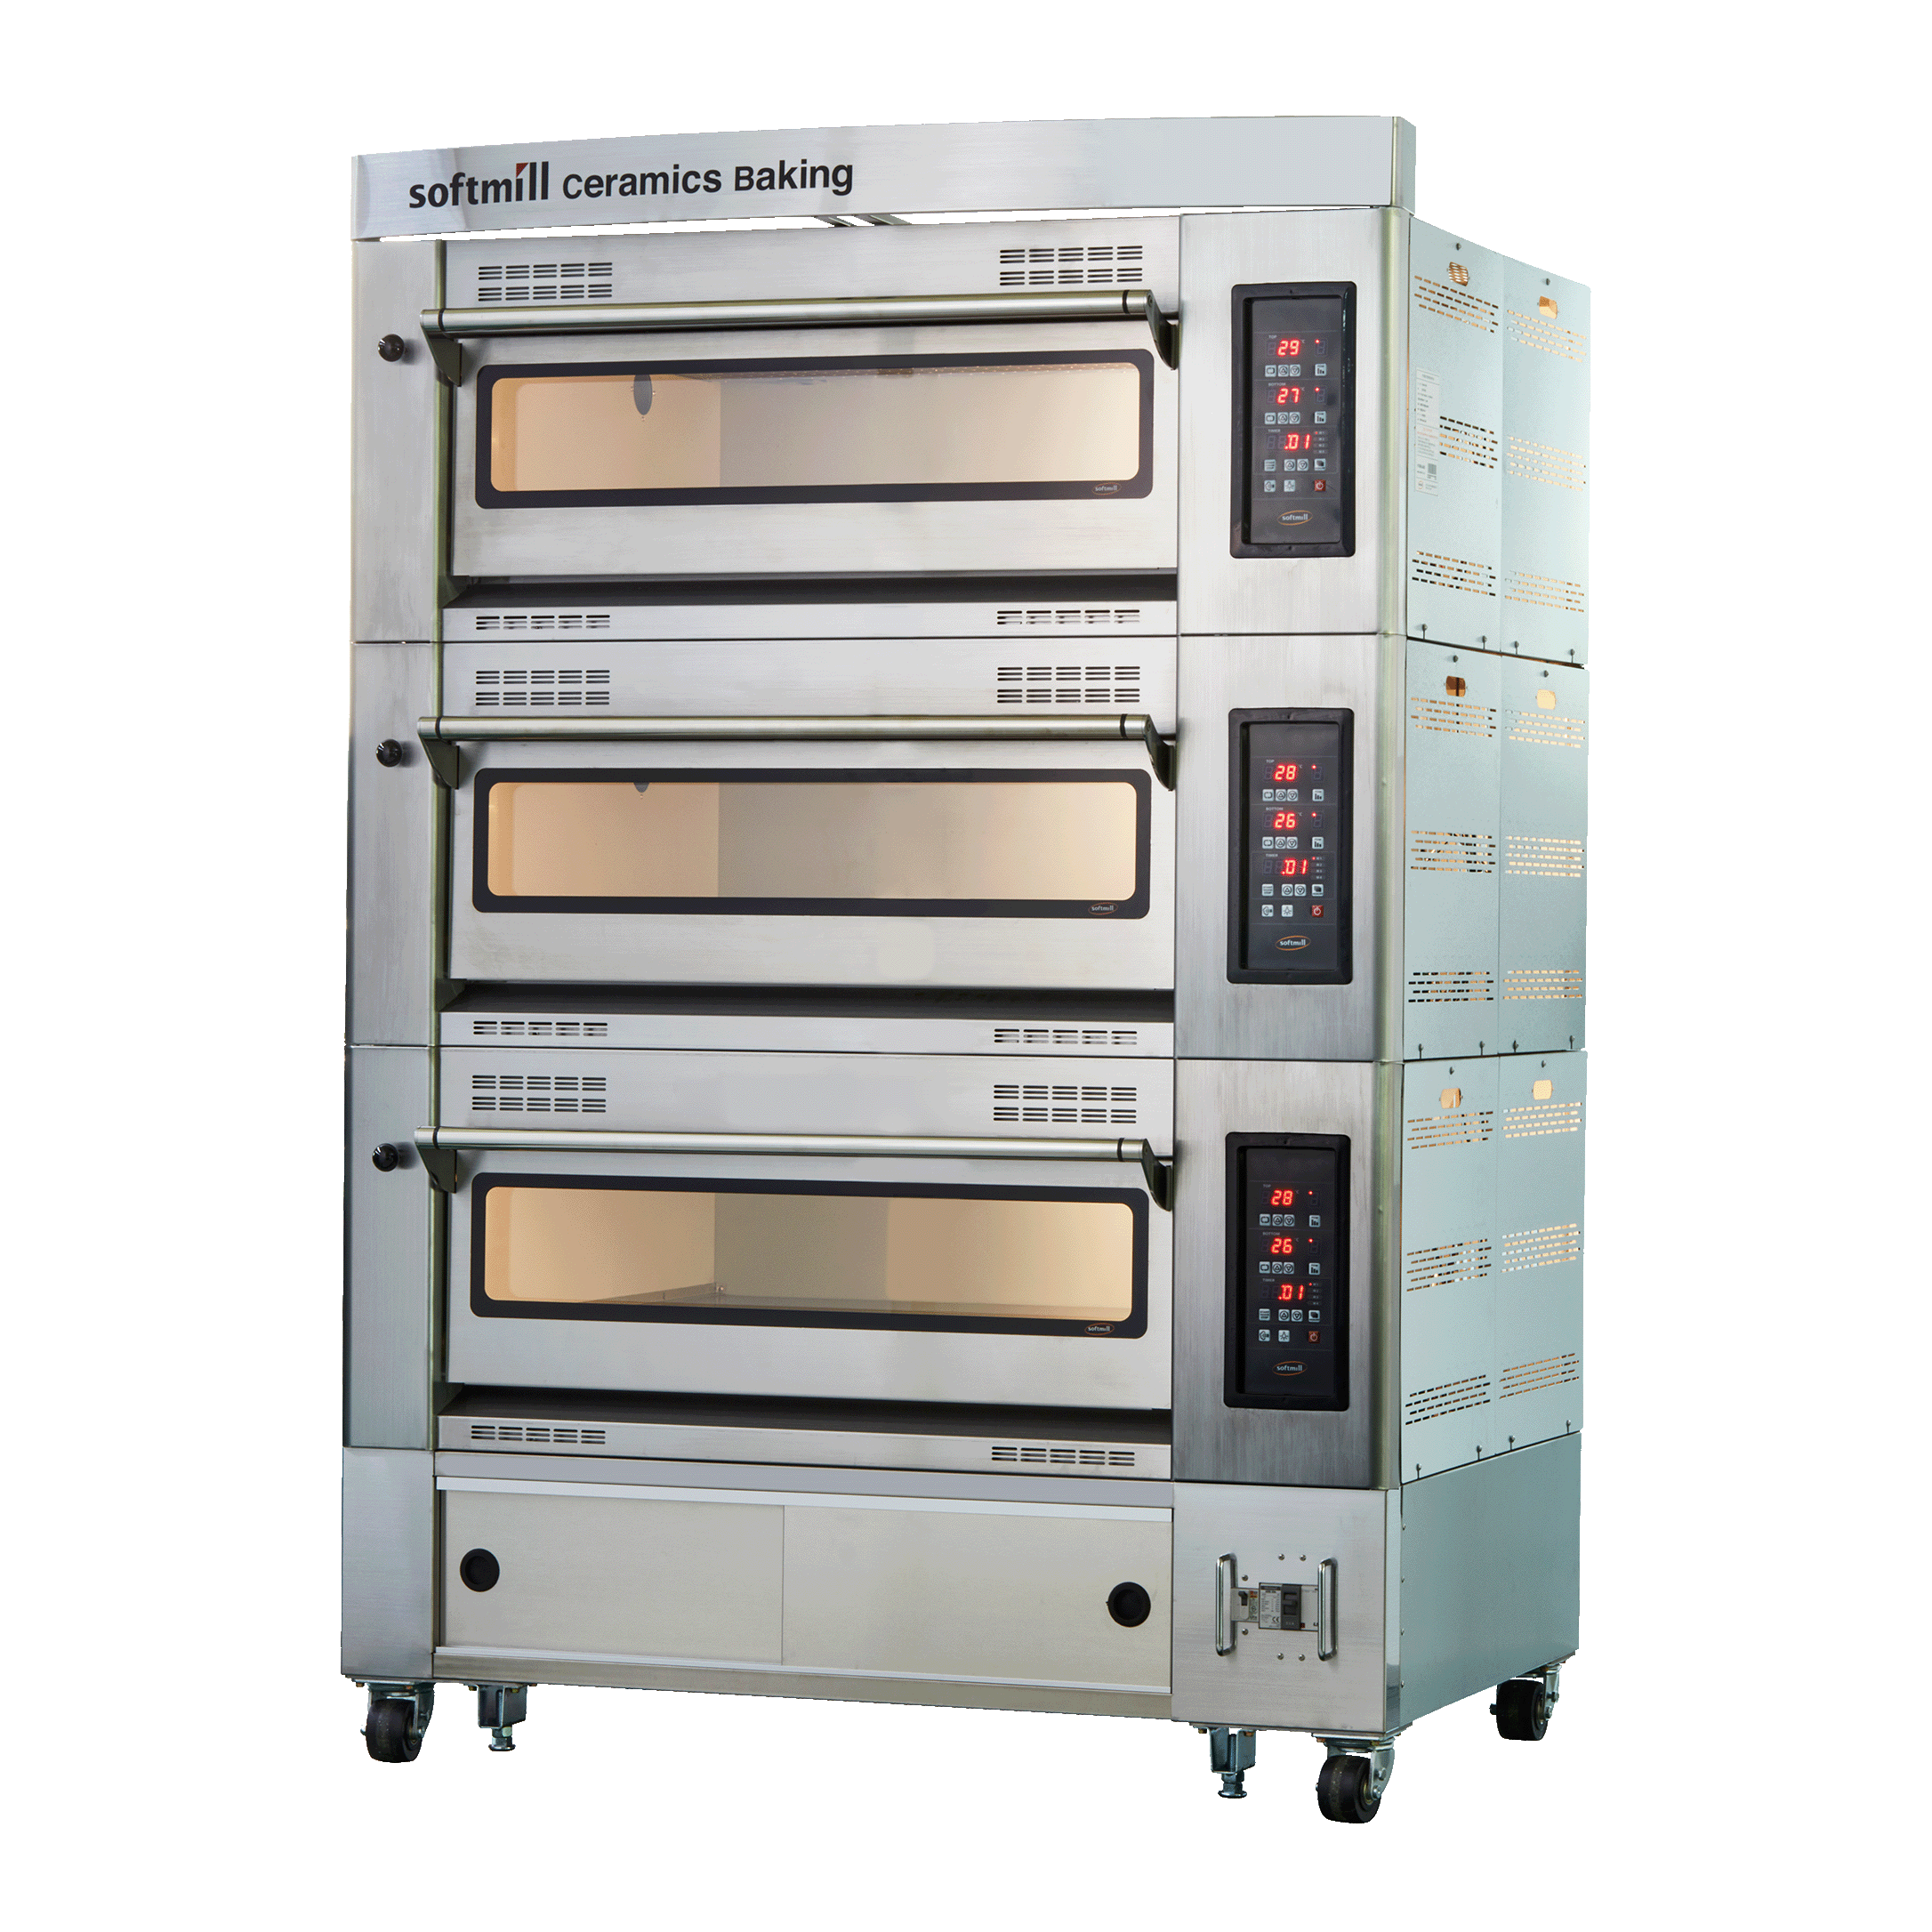 Deck Oven 2 trays 3 tiers main carousel mini size images